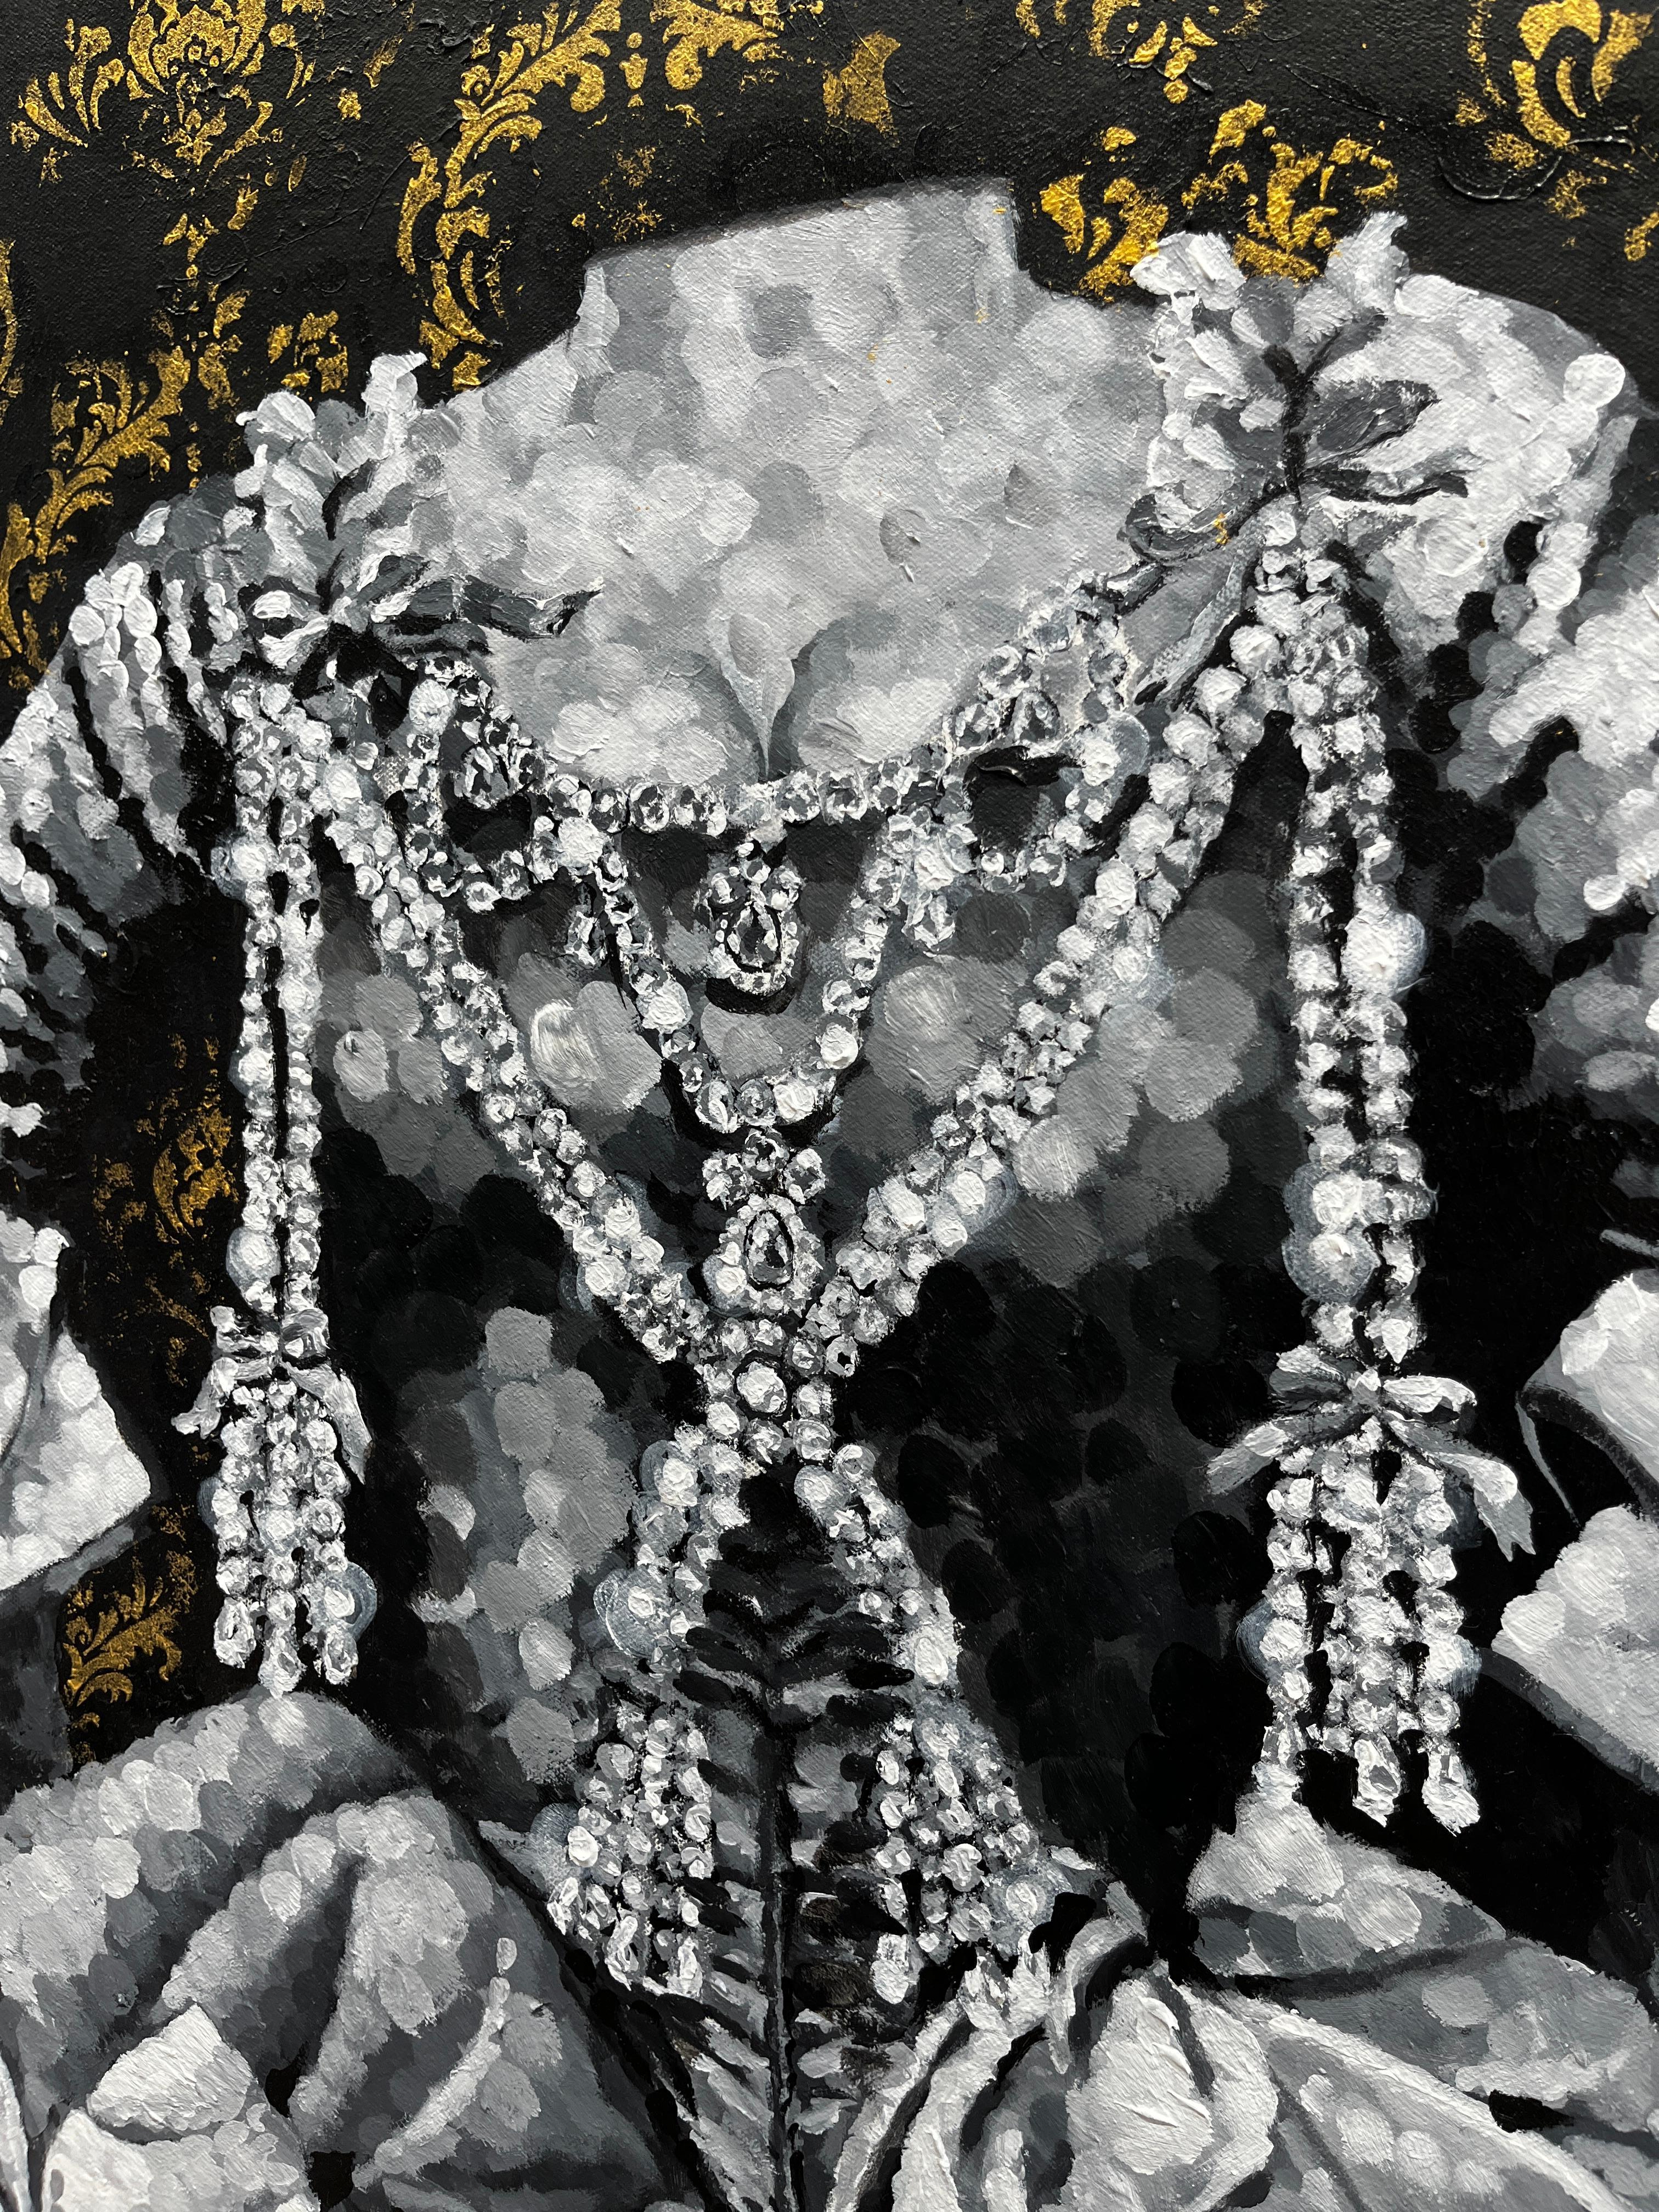 A large-scale black, white and gold regency era-inspired pointillism figurative painting of Marie Antoinette by artist Mauricio Battifora 

ABOUT THE WORK - In plain black and white; the big hair we know her for is on full display. The over-the-top